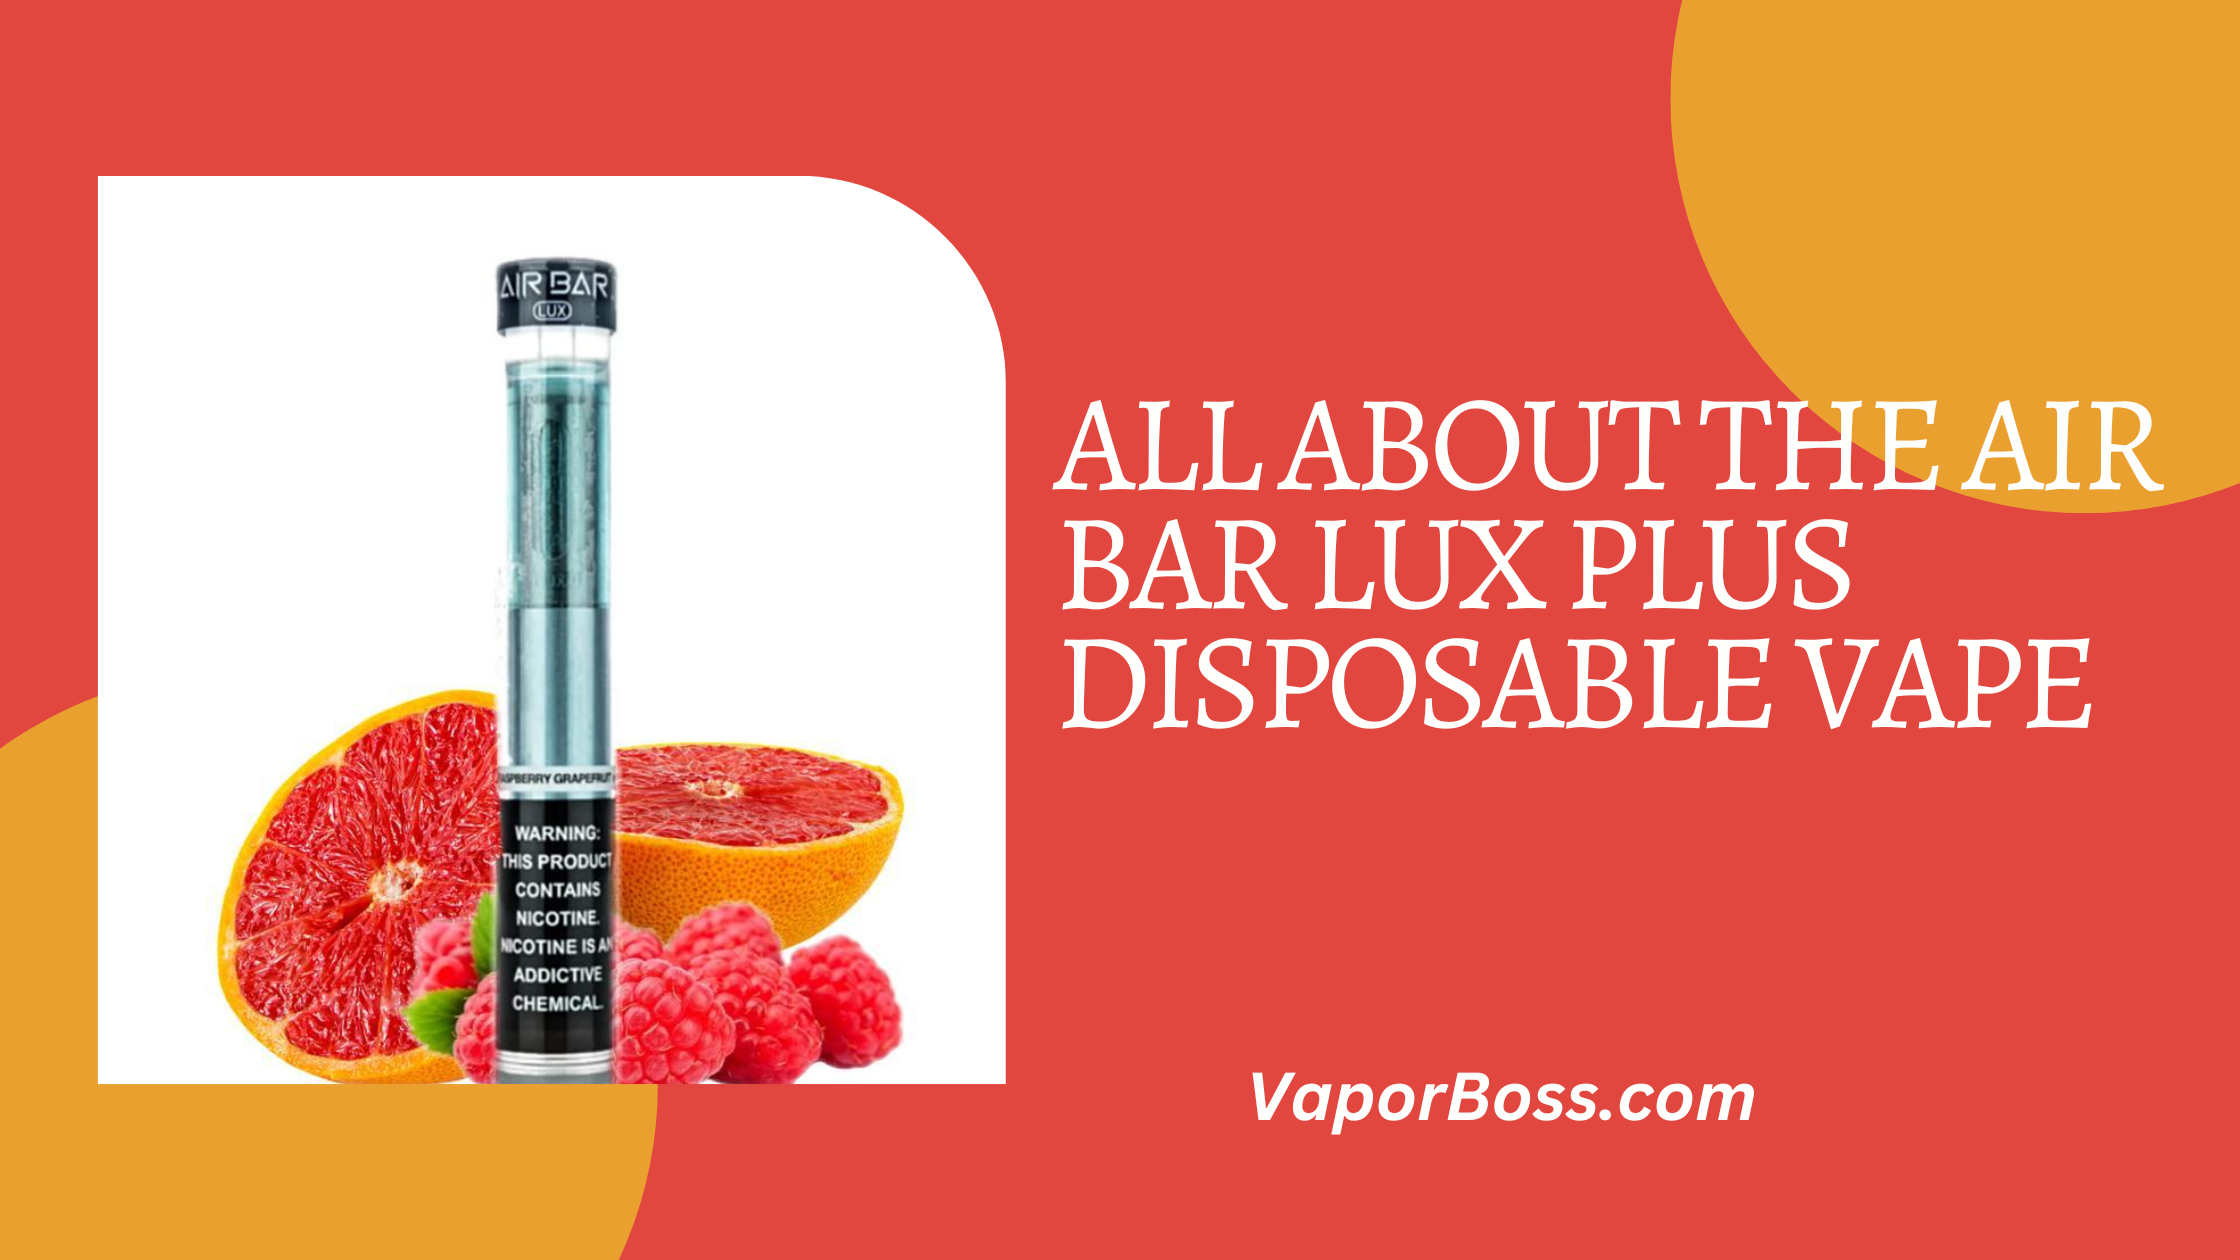 All About the Air Bar Lux Plus Disposable Vape